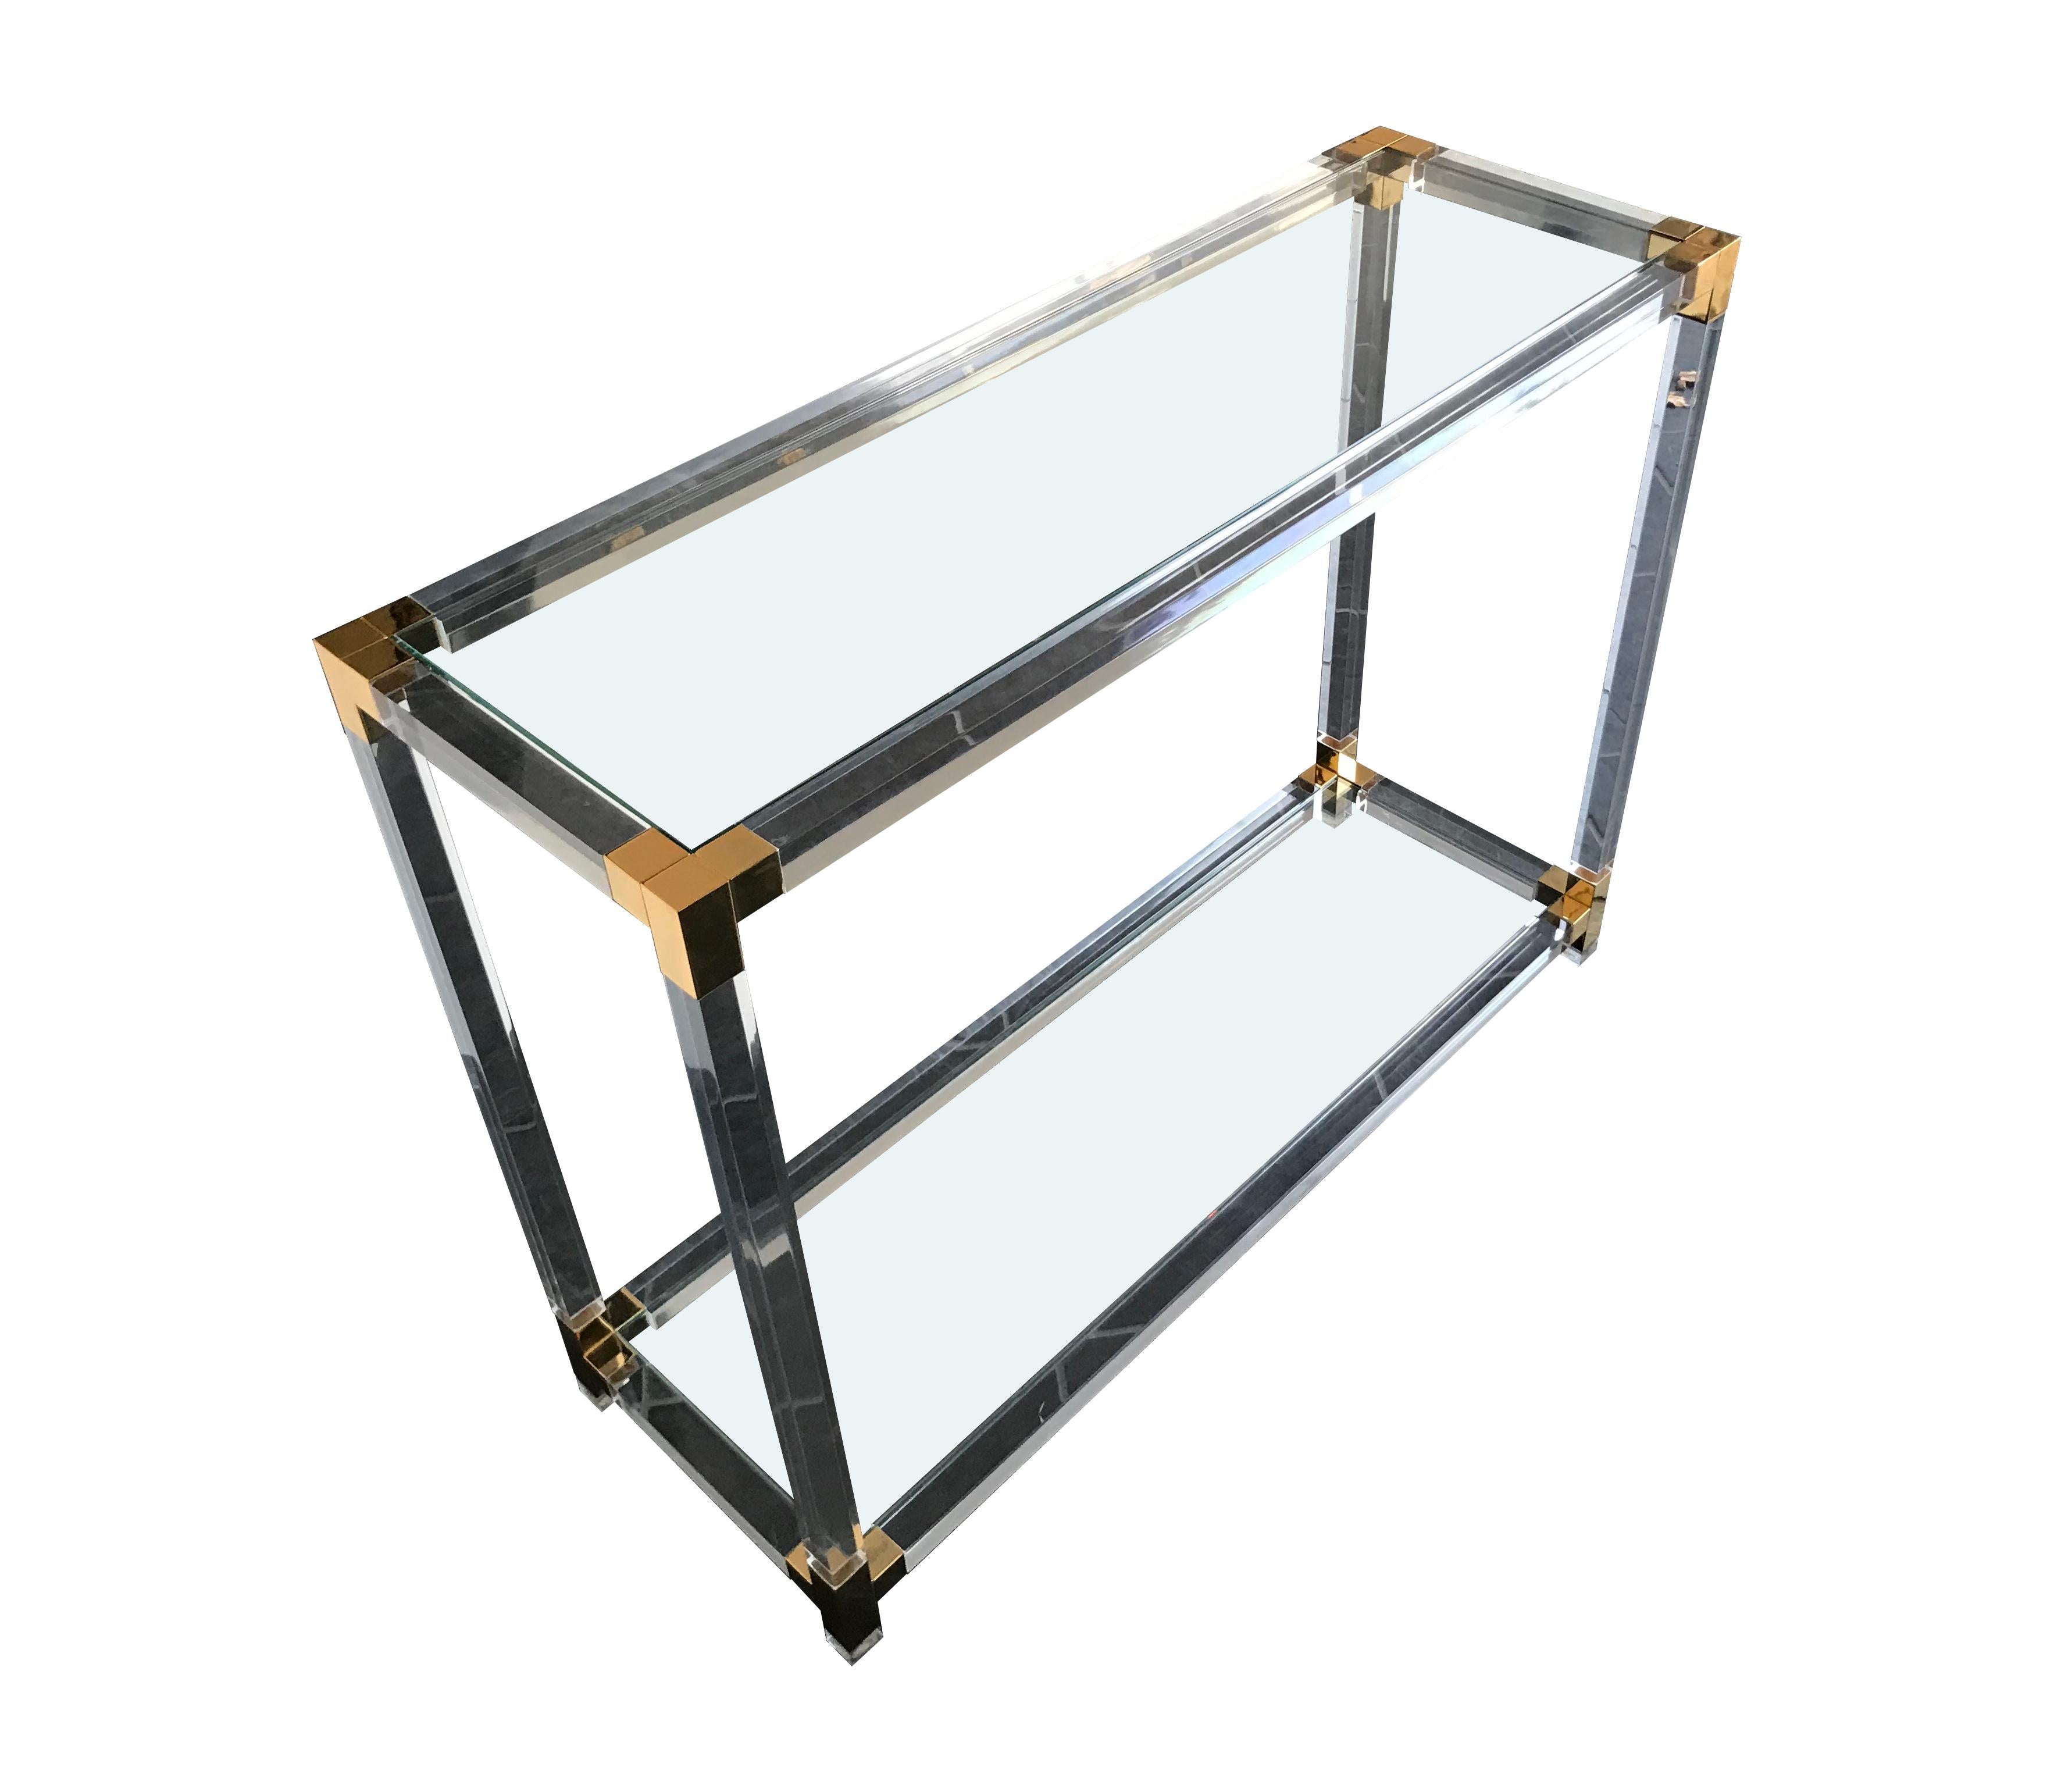 A Lucite console table with gilt metal corner joints and 2 clear glass shelves.